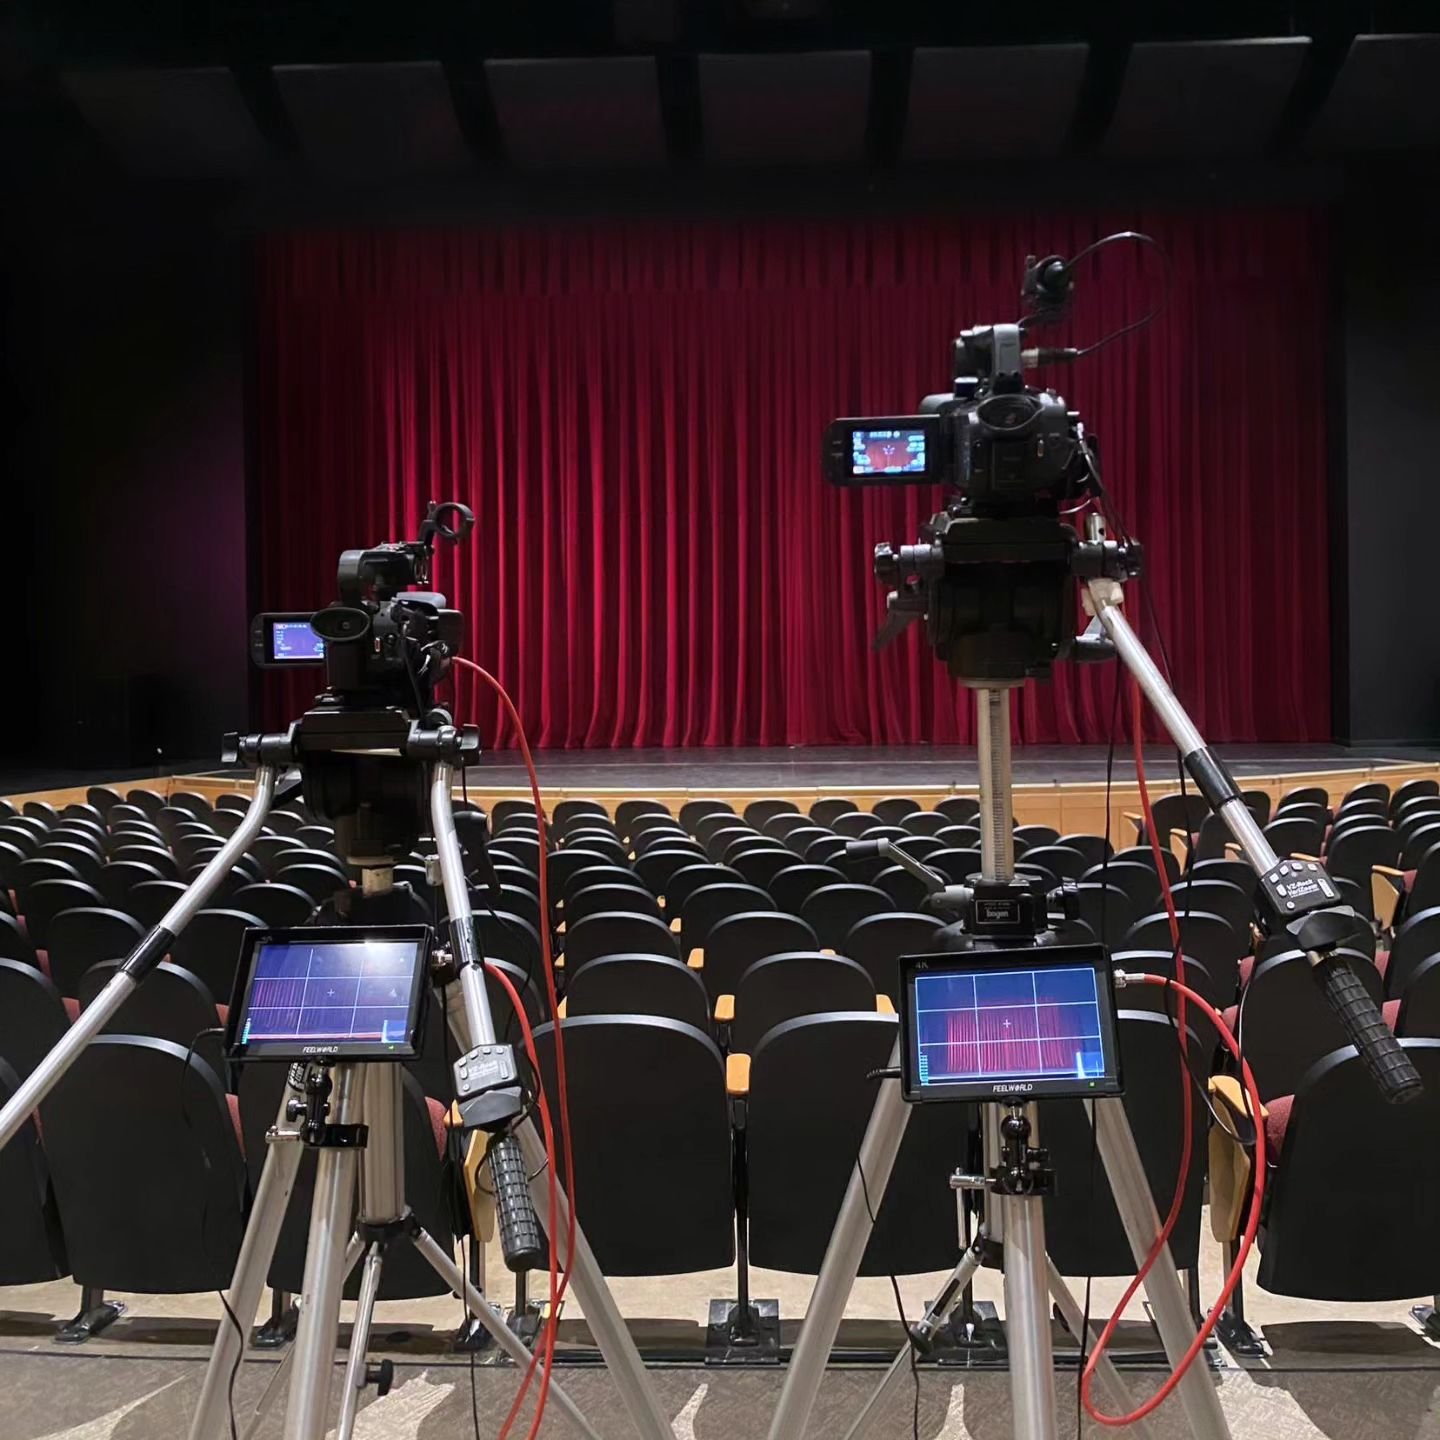 Always happy to record live events for our clients! Last night Nico recorded the Get To The Pointe Ballet Academy's recital with our state of the art cameras and audio equipment. Reach out to them to order a DVD and Blu-ray to keep!